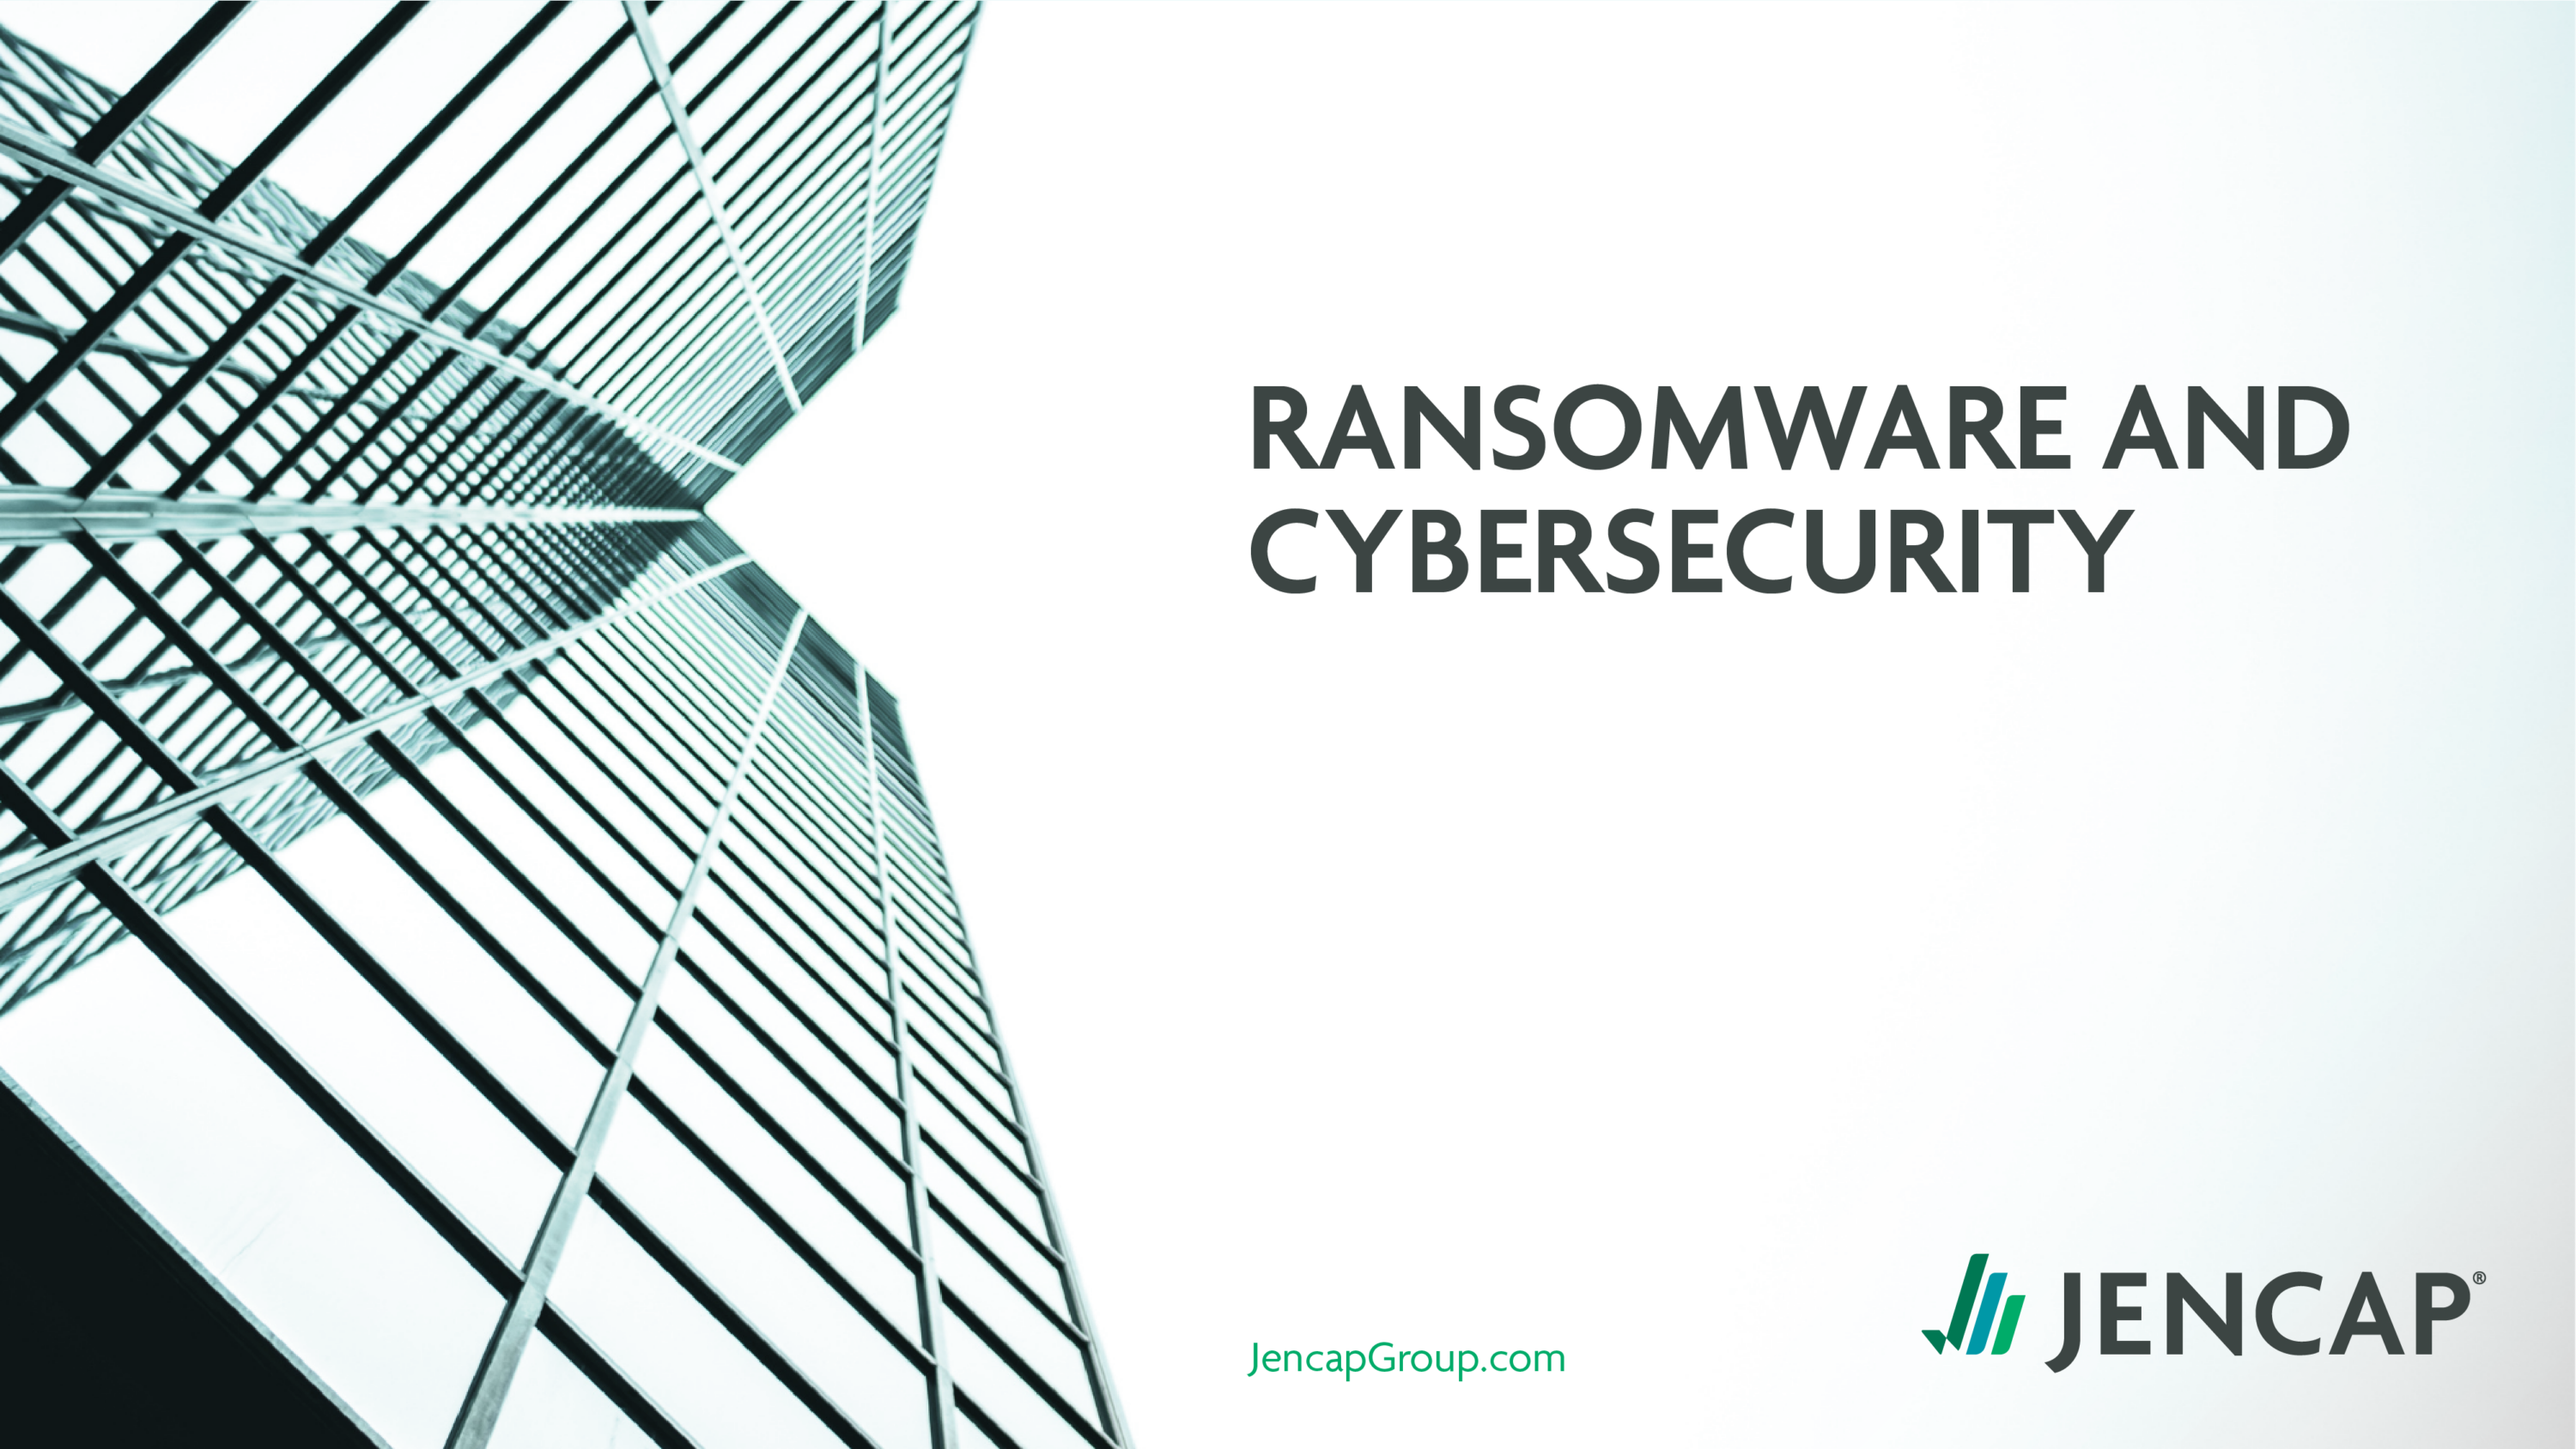 Ransomware and Cybersecurity